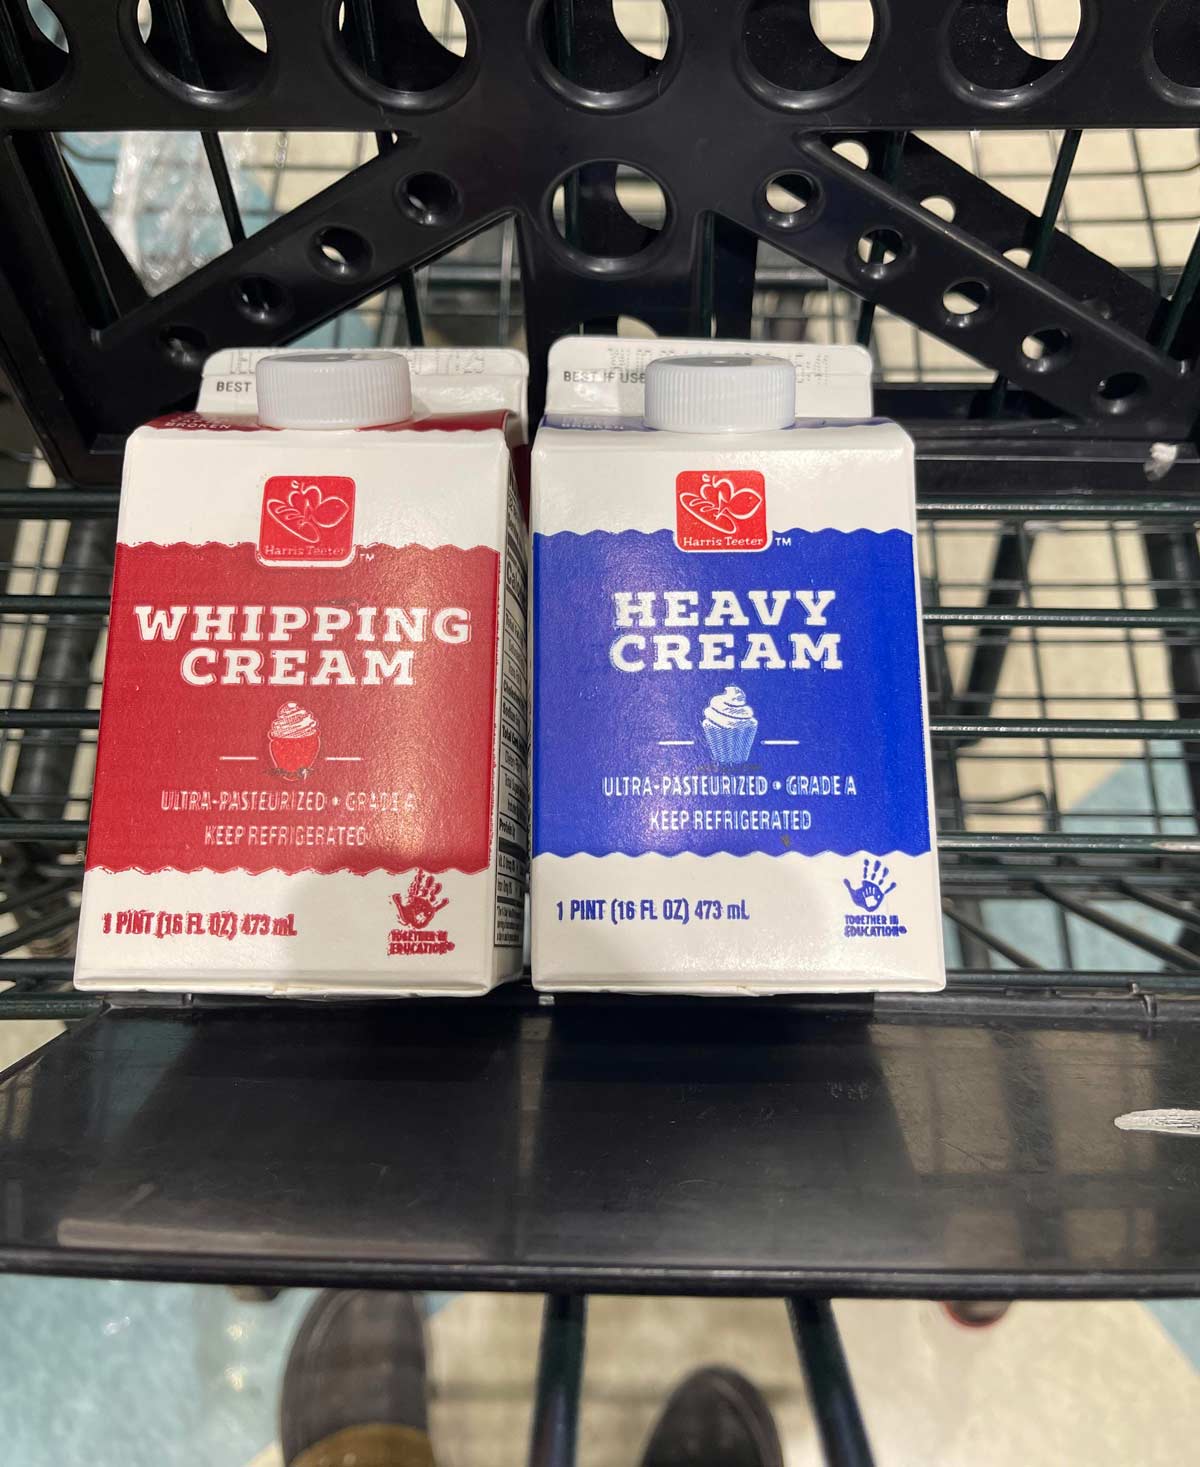 Sent boyfriend to pick up a carton of heavy whipping cream for thanksgiving